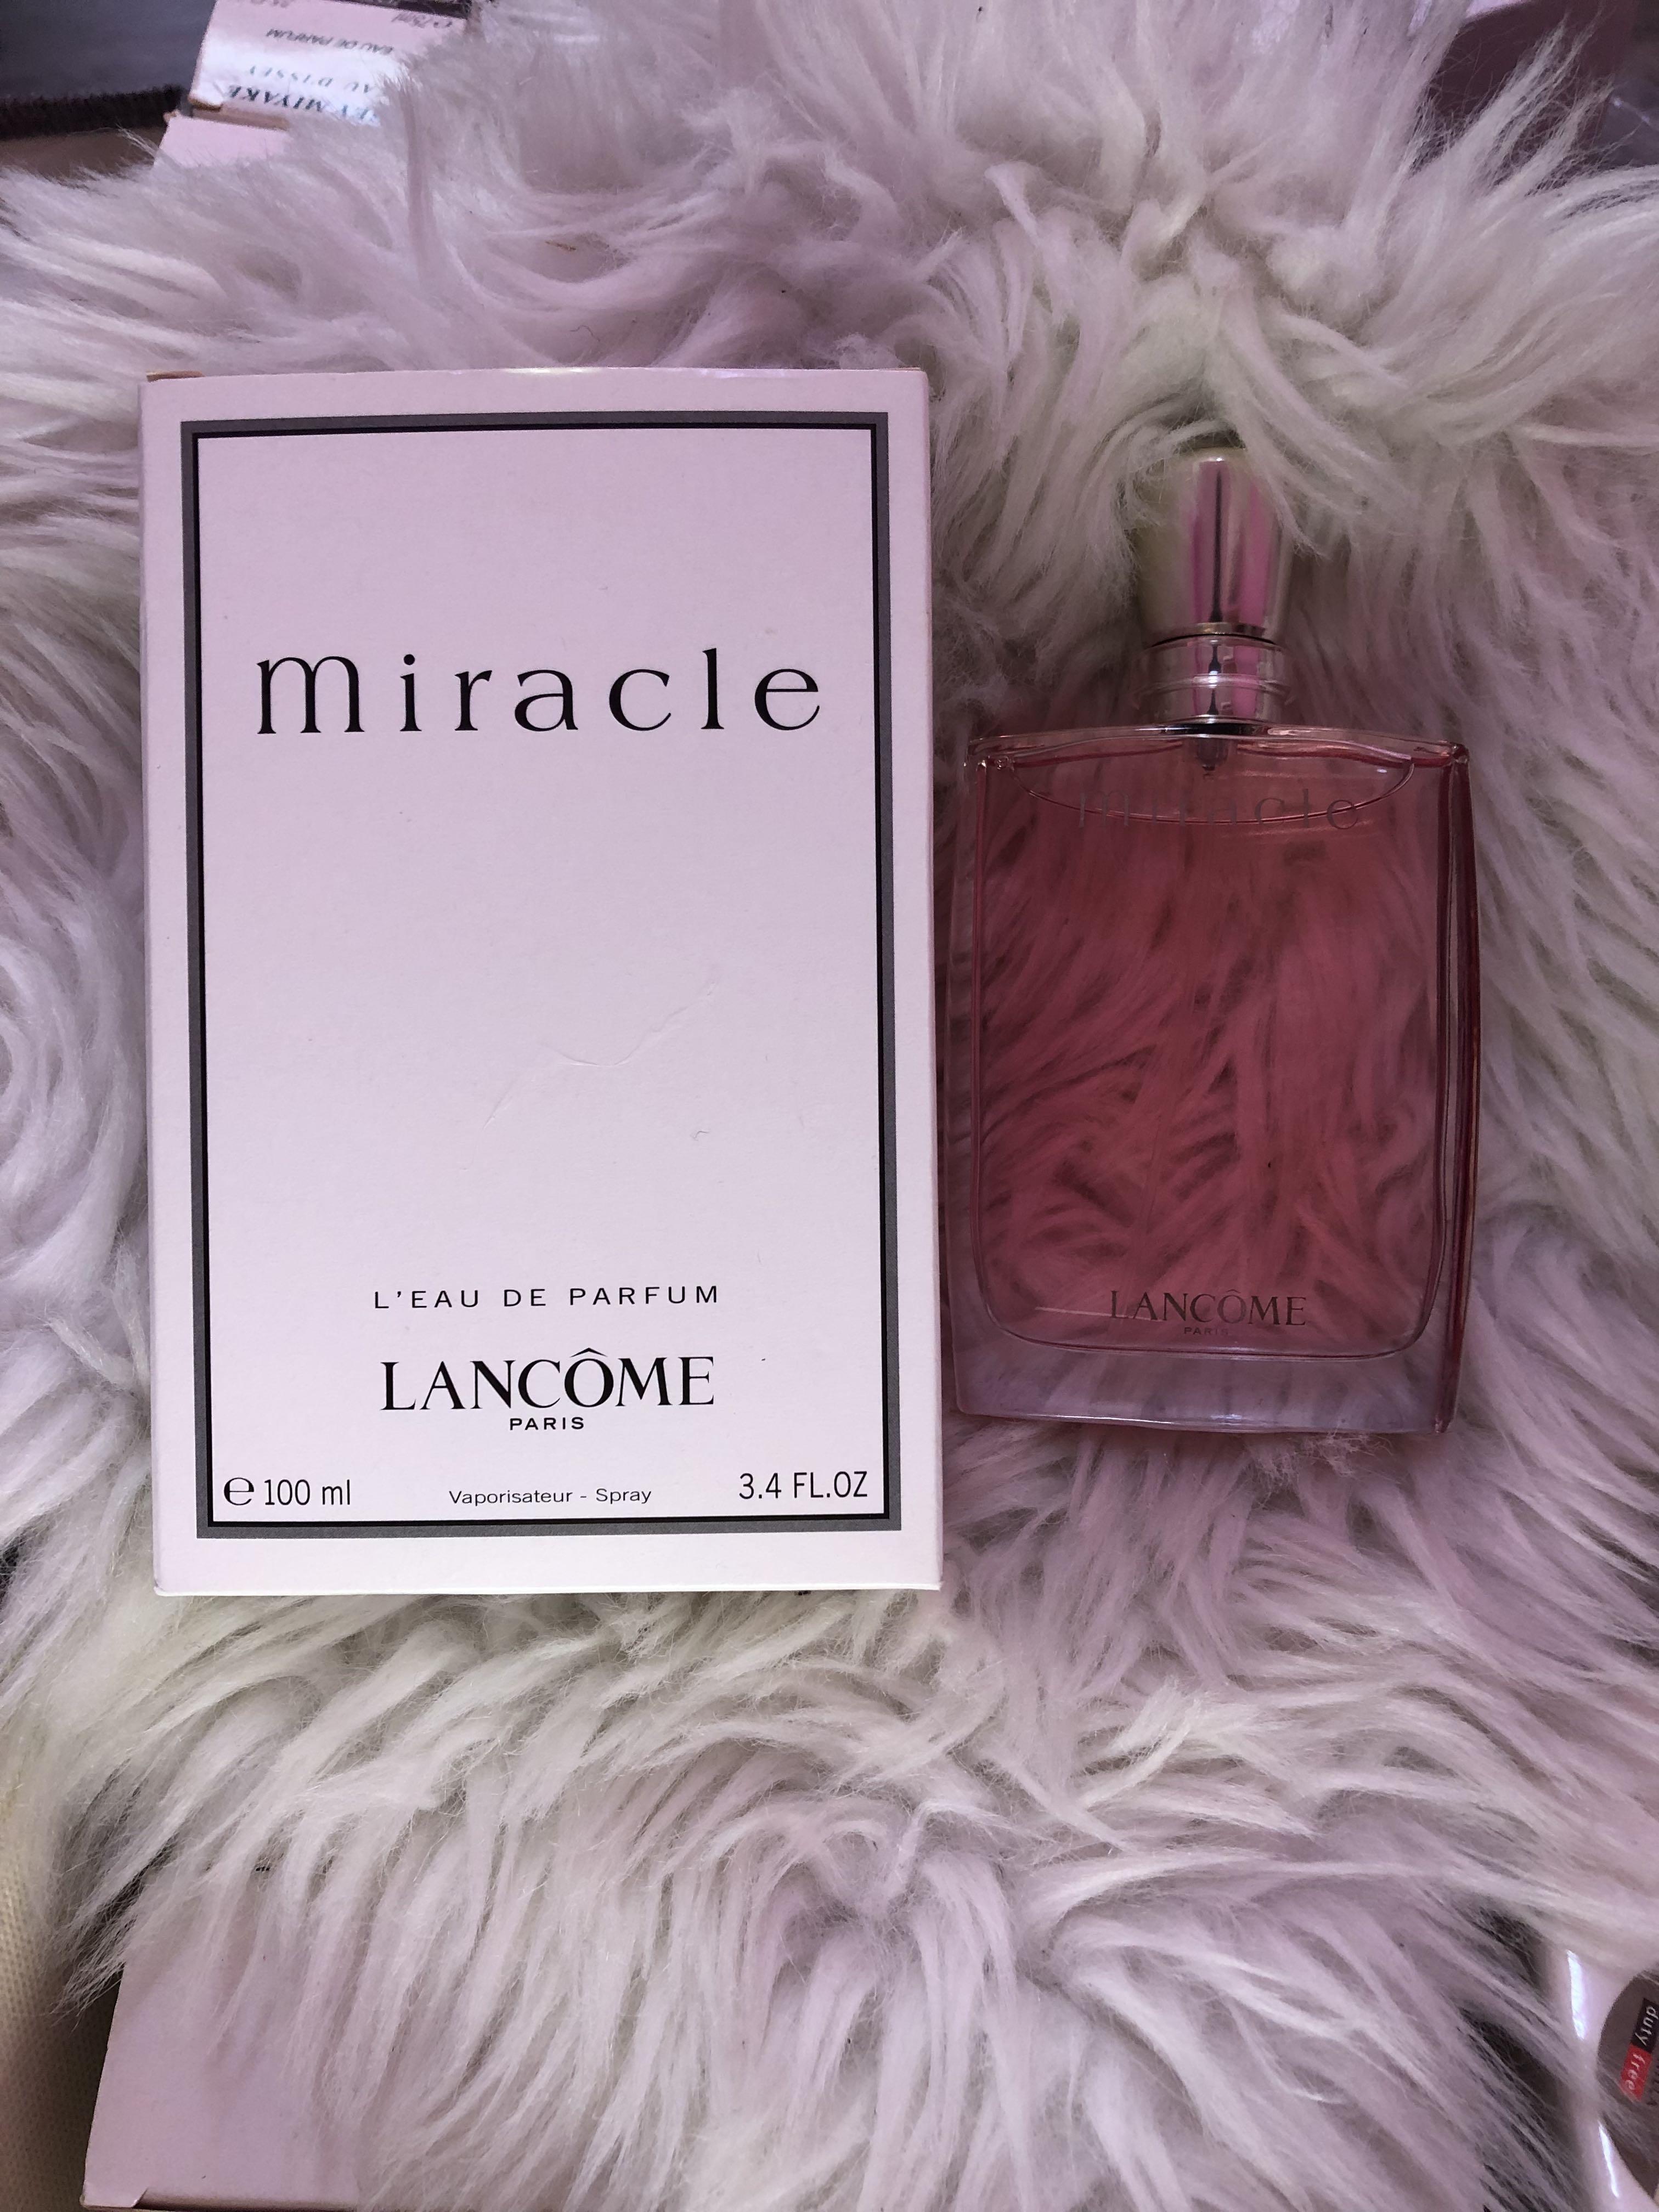 Lancome Miracle Leau De Parfum 100ml Tester Beauty And Personal Care Fragrance And Deodorants On